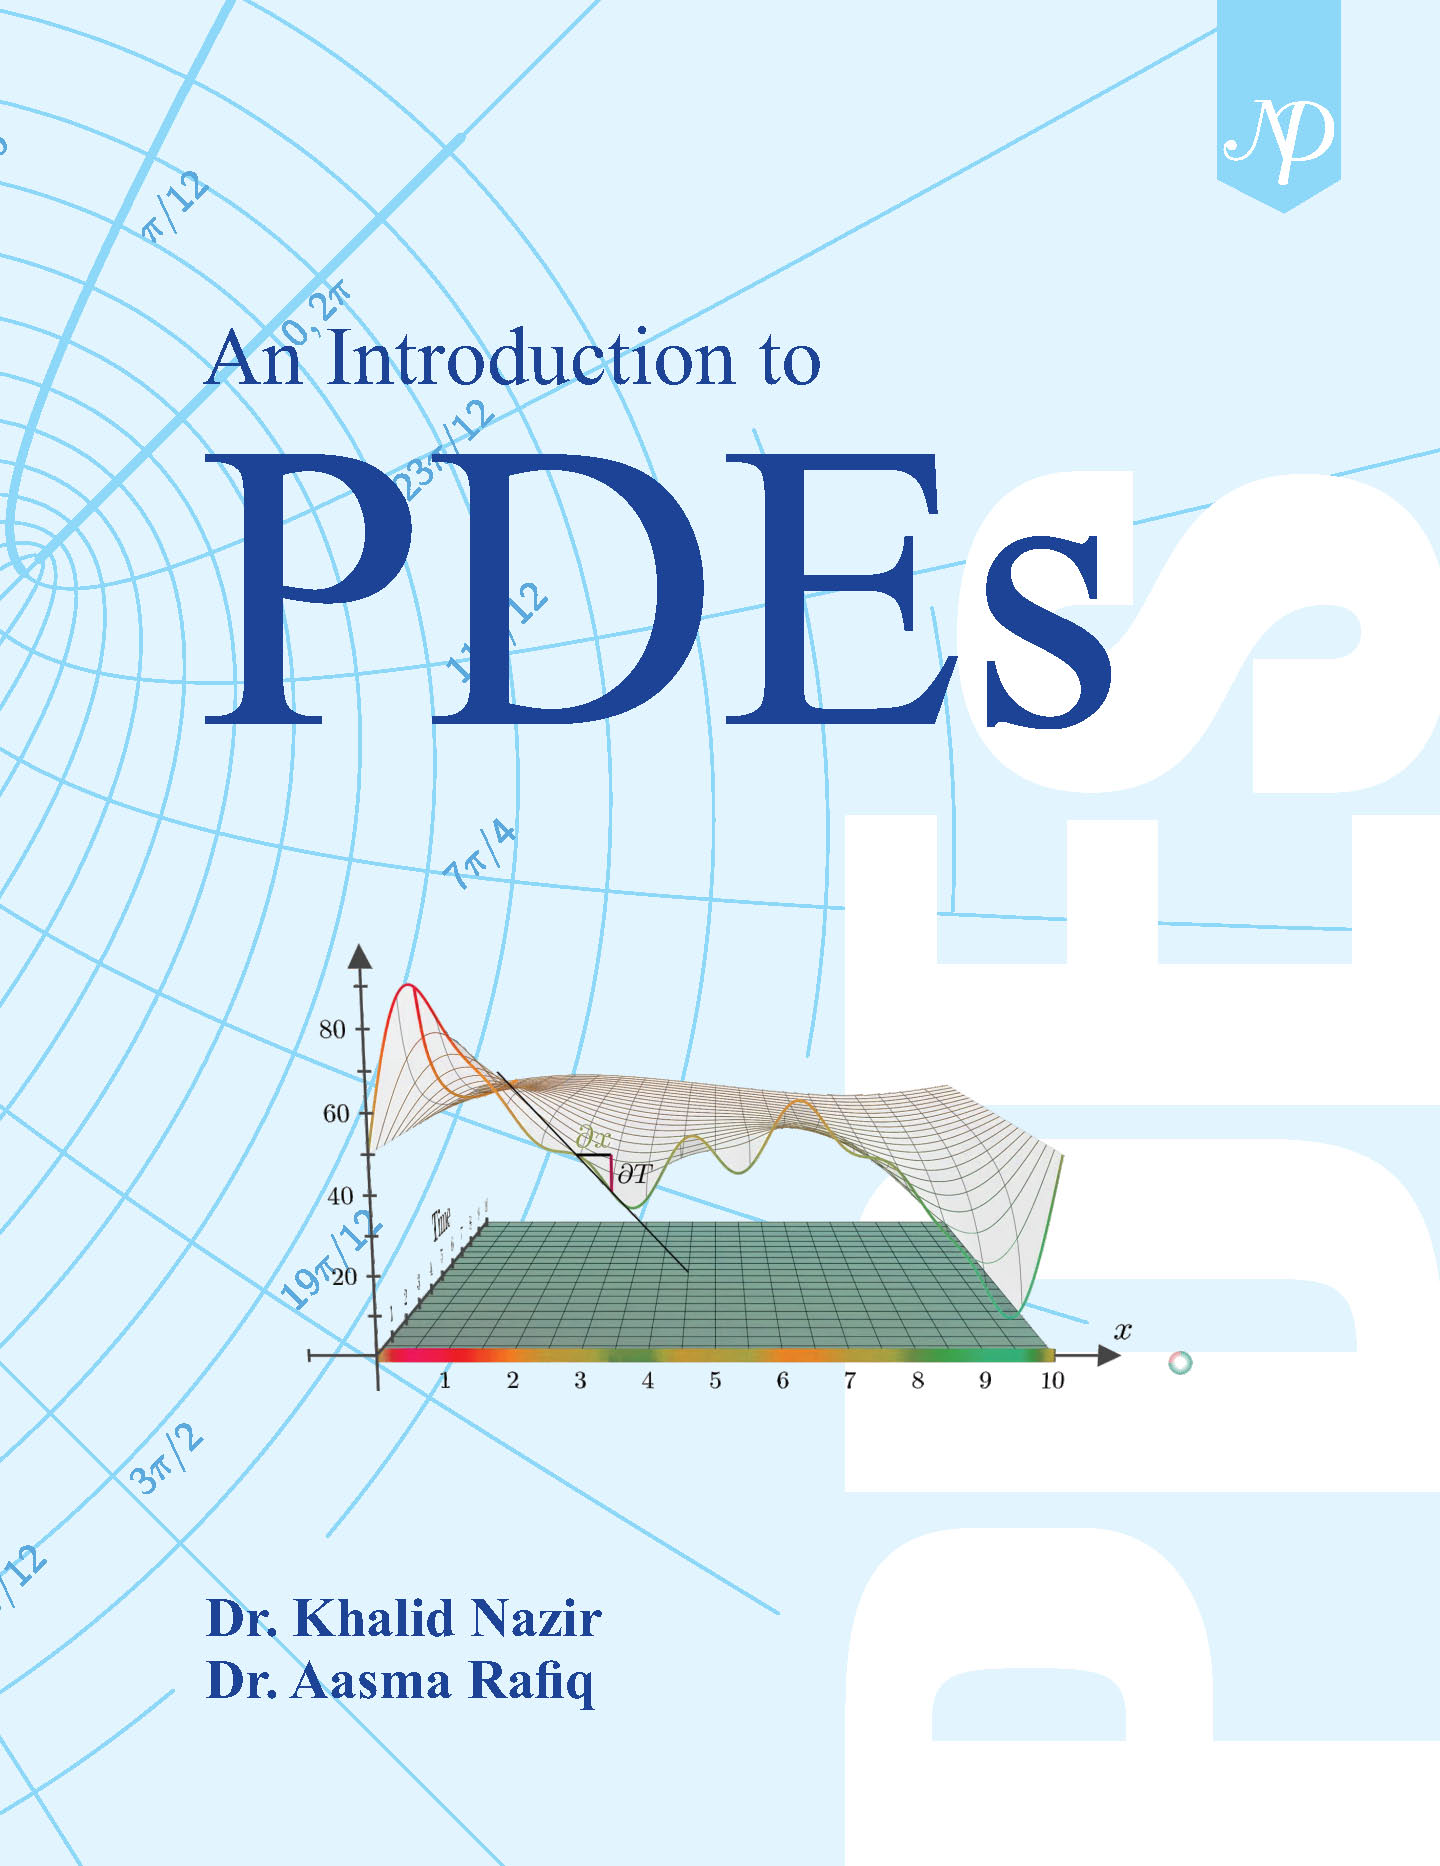 An Introduction to PDEs Cover.jpg